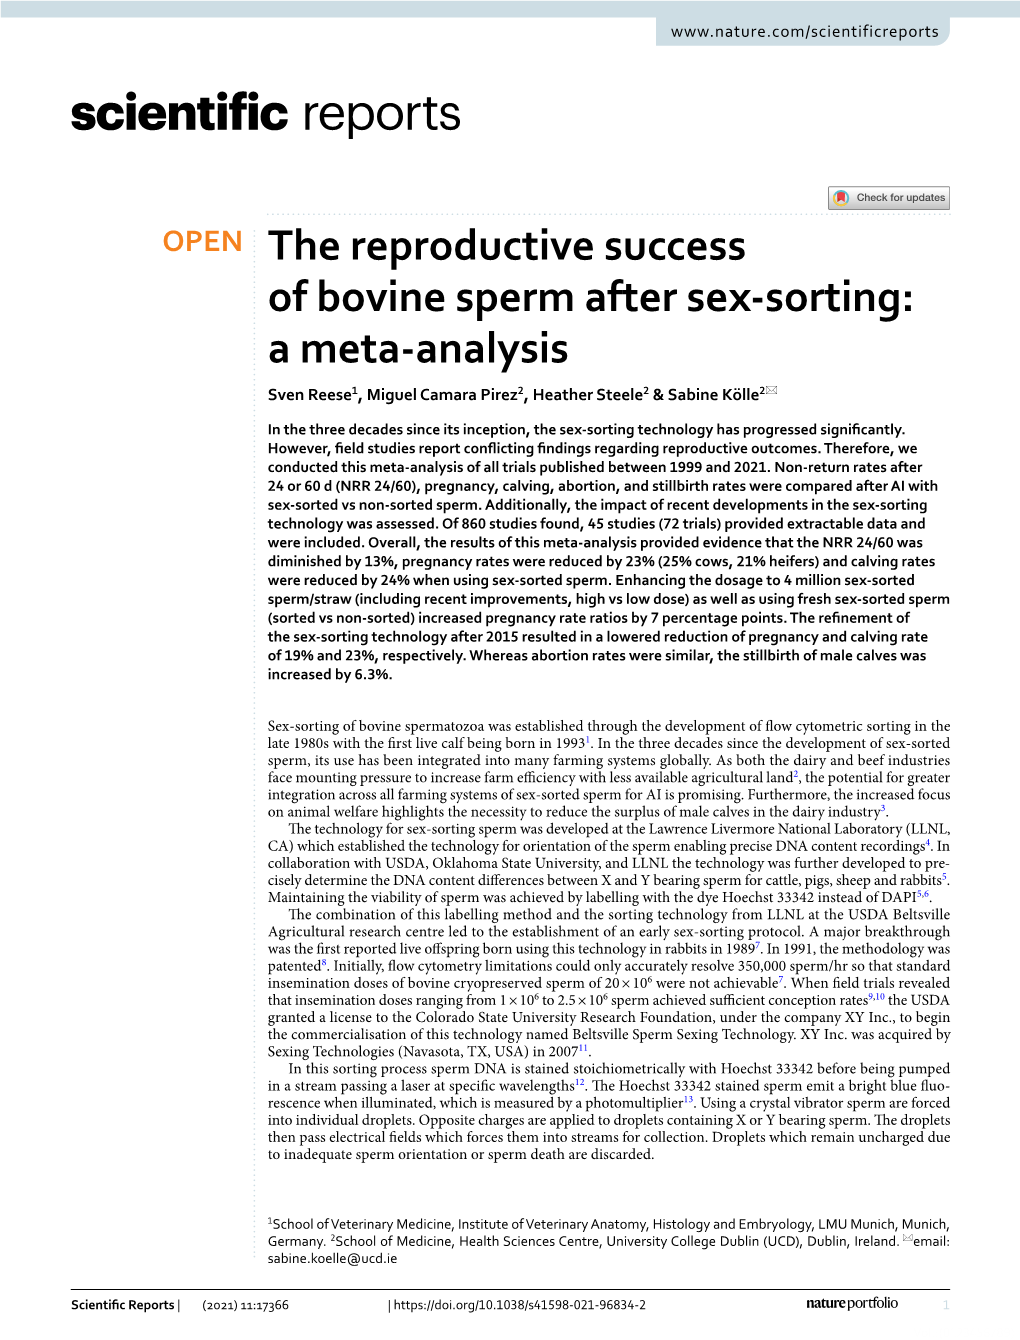 The Reproductive Success of Bovine Sperm After Sex-Sorting: a Meta-Analysis